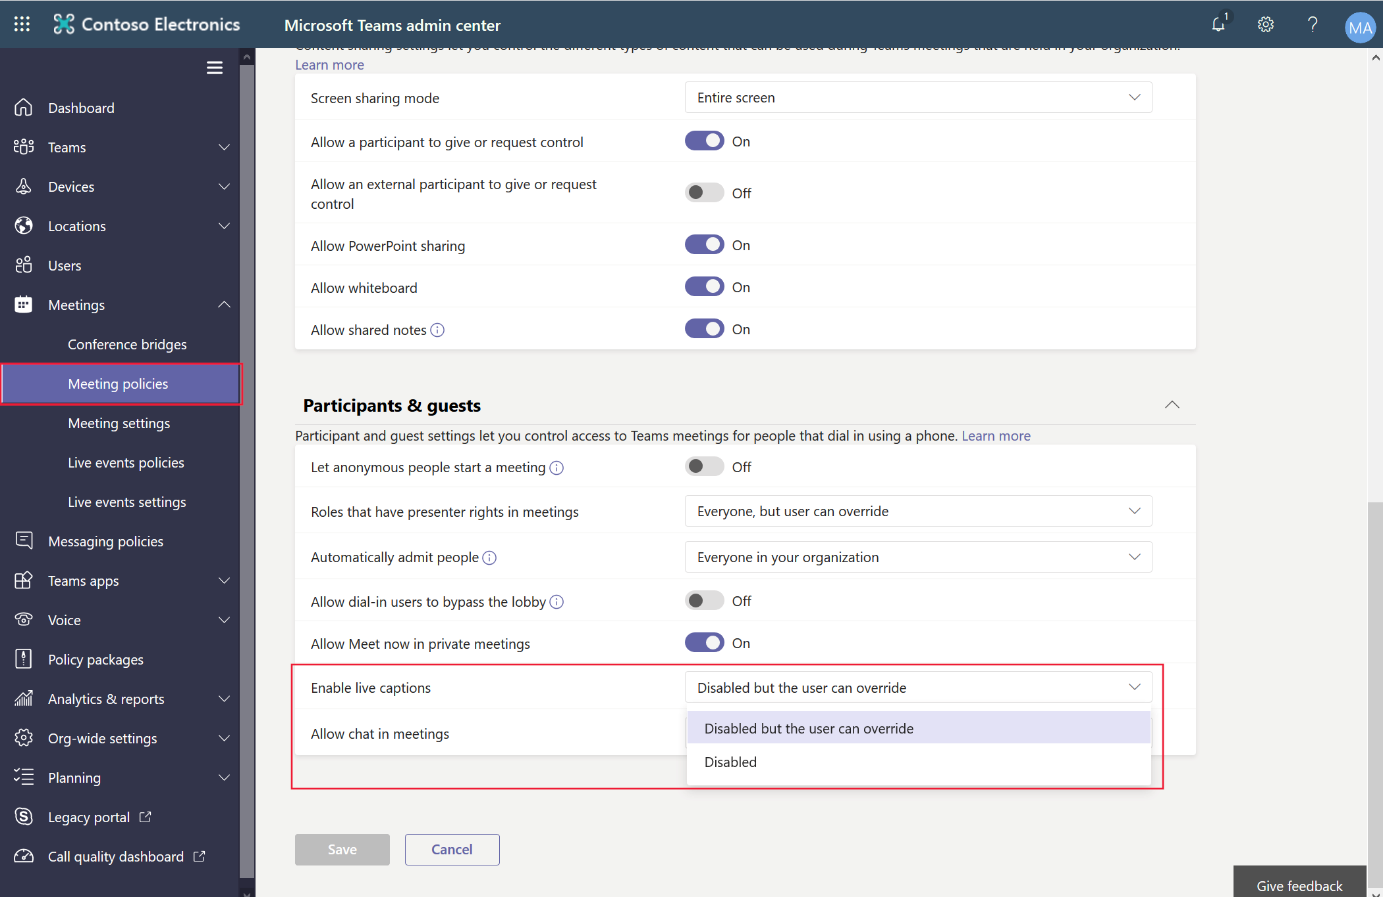 Screenshot showing meeting policies in the Microsoft Teams admin center.